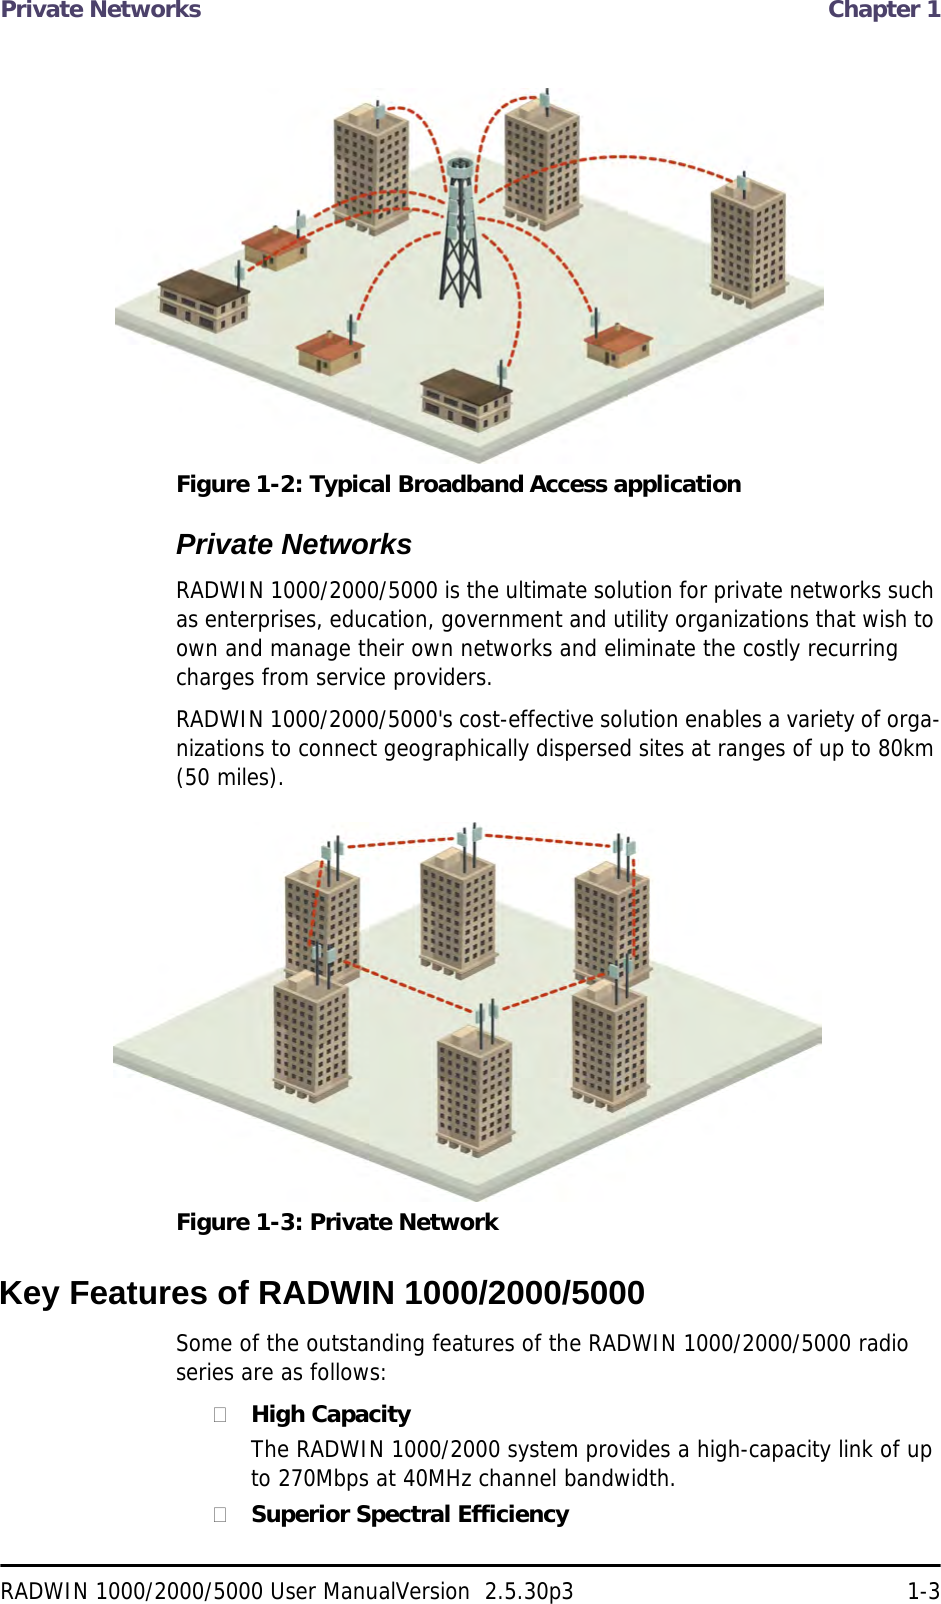 Private Networks  Chapter 1RADWIN 1000/2000/5000 User ManualVersion  2.5.30p3 1-3Figure 1-2: Typical Broadband Access applicationPrivate NetworksRADWIN 1000/2000/5000 is the ultimate solution for private networks such as enterprises, education, government and utility organizations that wish to own and manage their own networks and eliminate the costly recurring charges from service providers.RADWIN 1000/2000/5000&apos;s cost-effective solution enables a variety of orga-nizations to connect geographically dispersed sites at ranges of up to 80km (50 miles).Figure 1-3: Private NetworkKey Features of RADWIN 1000/2000/5000Some of the outstanding features of the RADWIN 1000/2000/5000 radio series are as follows:High CapacityThe RADWIN 1000/2000 system provides a high-capacity link of up to 270Mbps at 40MHz channel bandwidth.Superior Spectral Efficiency